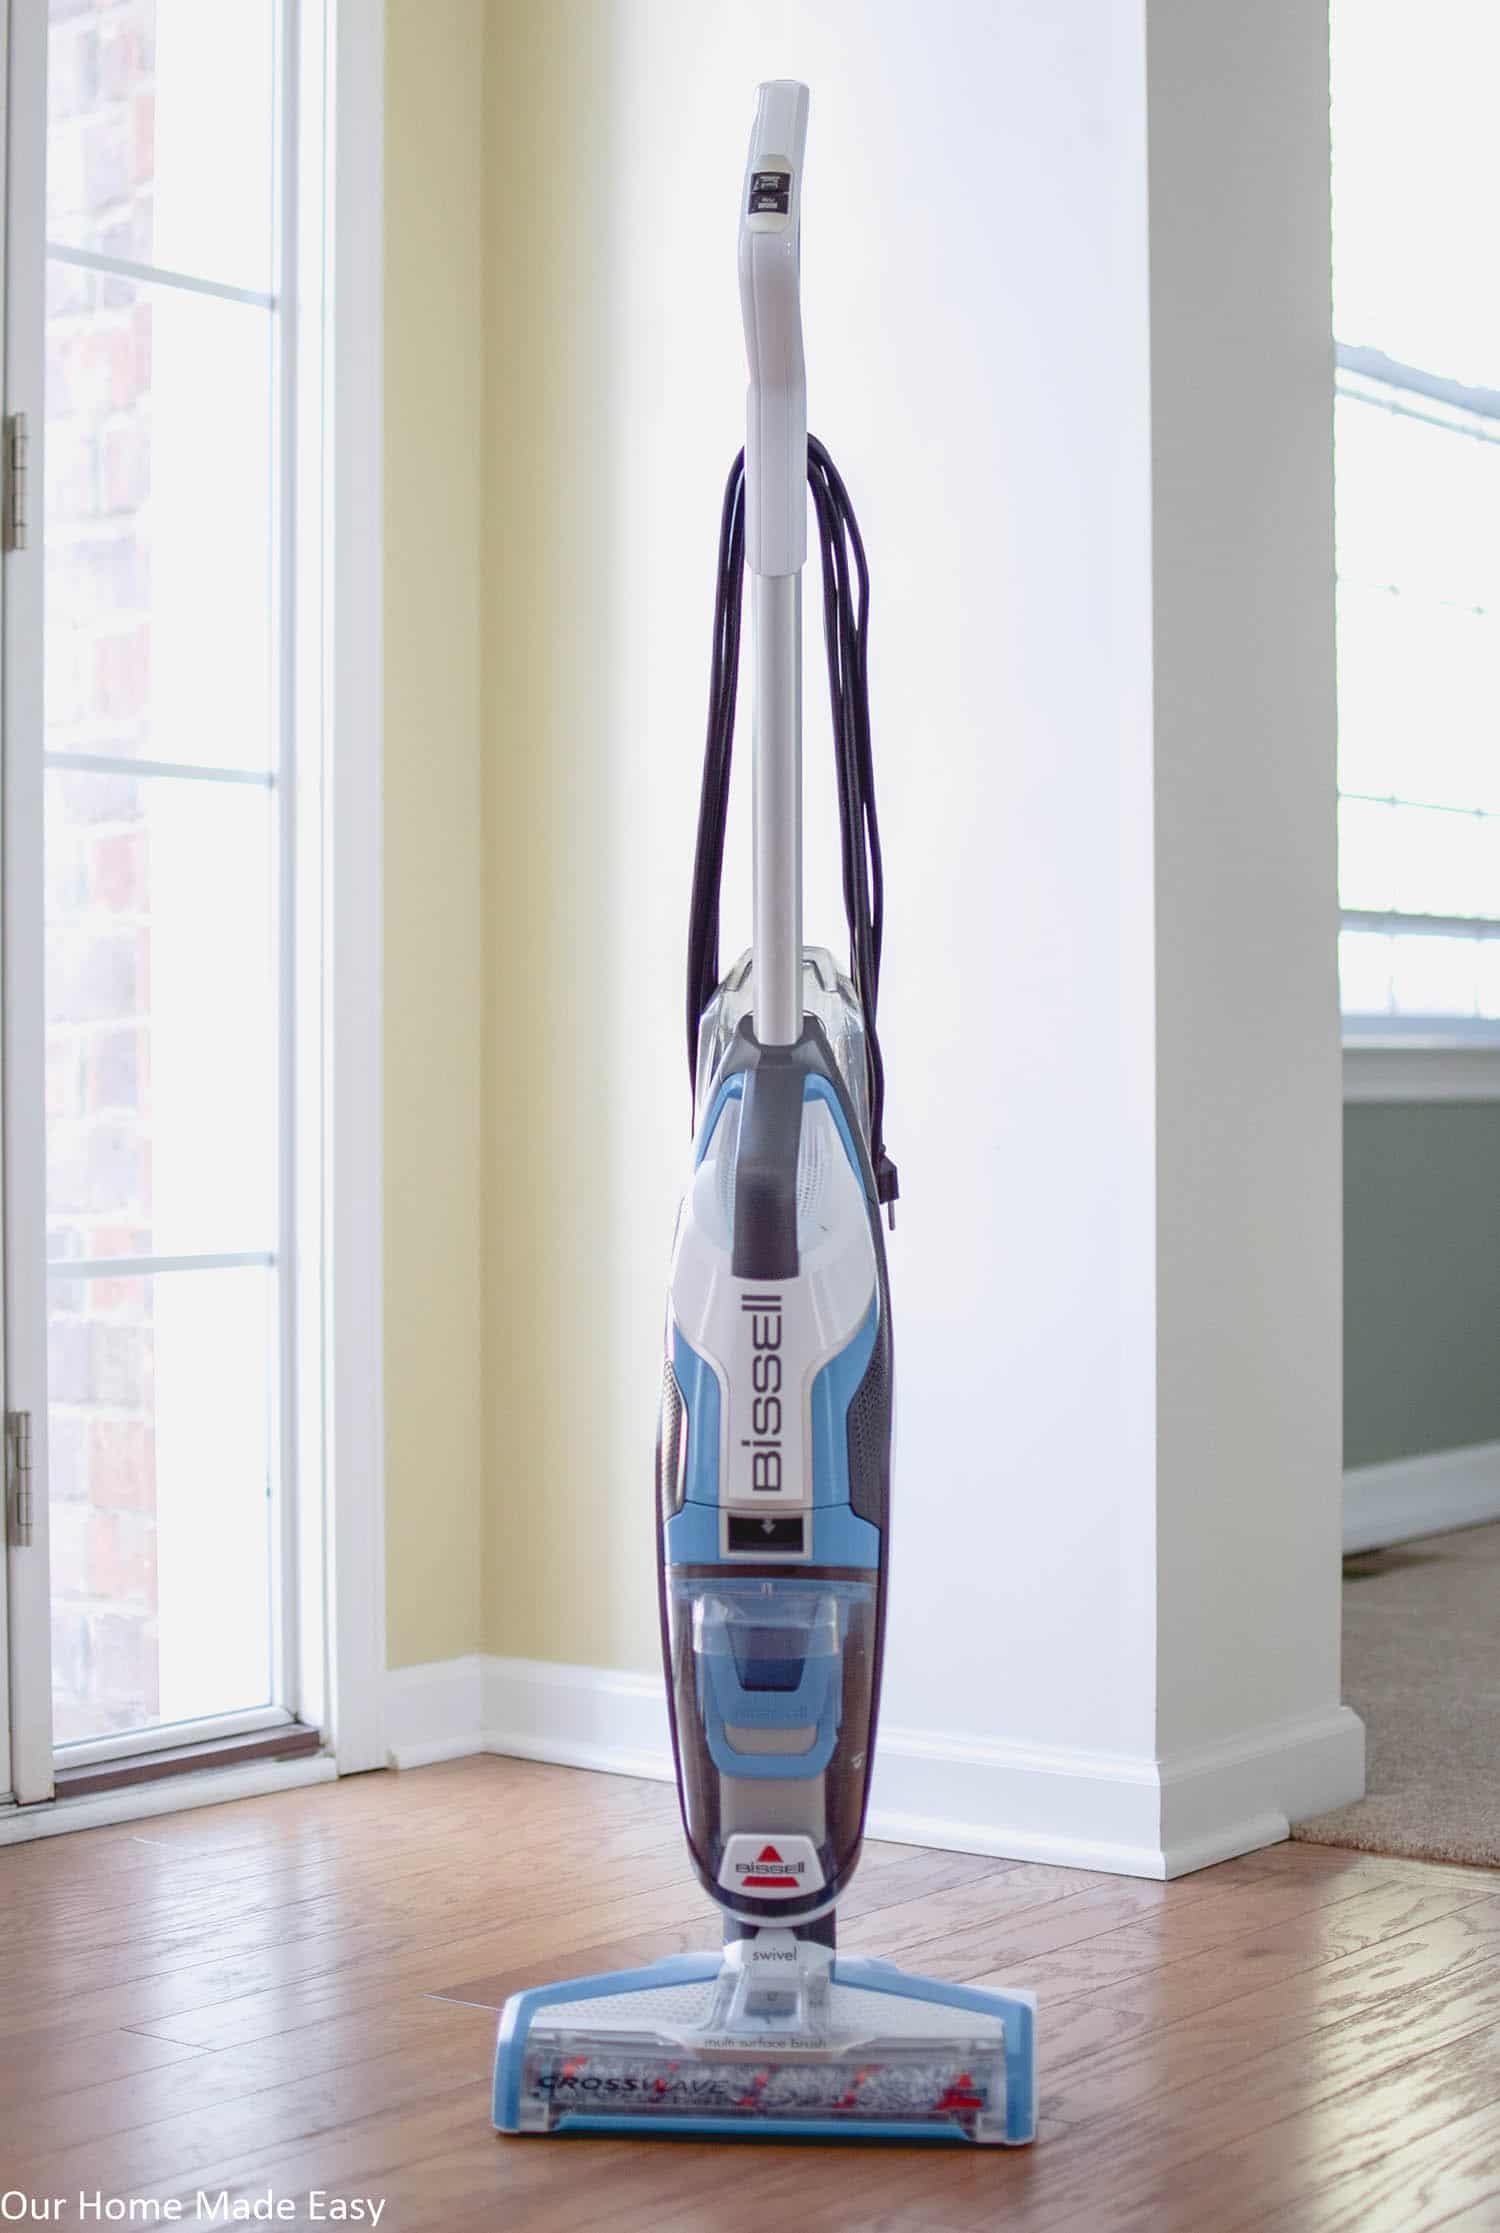 If you're a working mom and don't have an efficient vacuum cleaner, you're doing cleaning ALL wrong